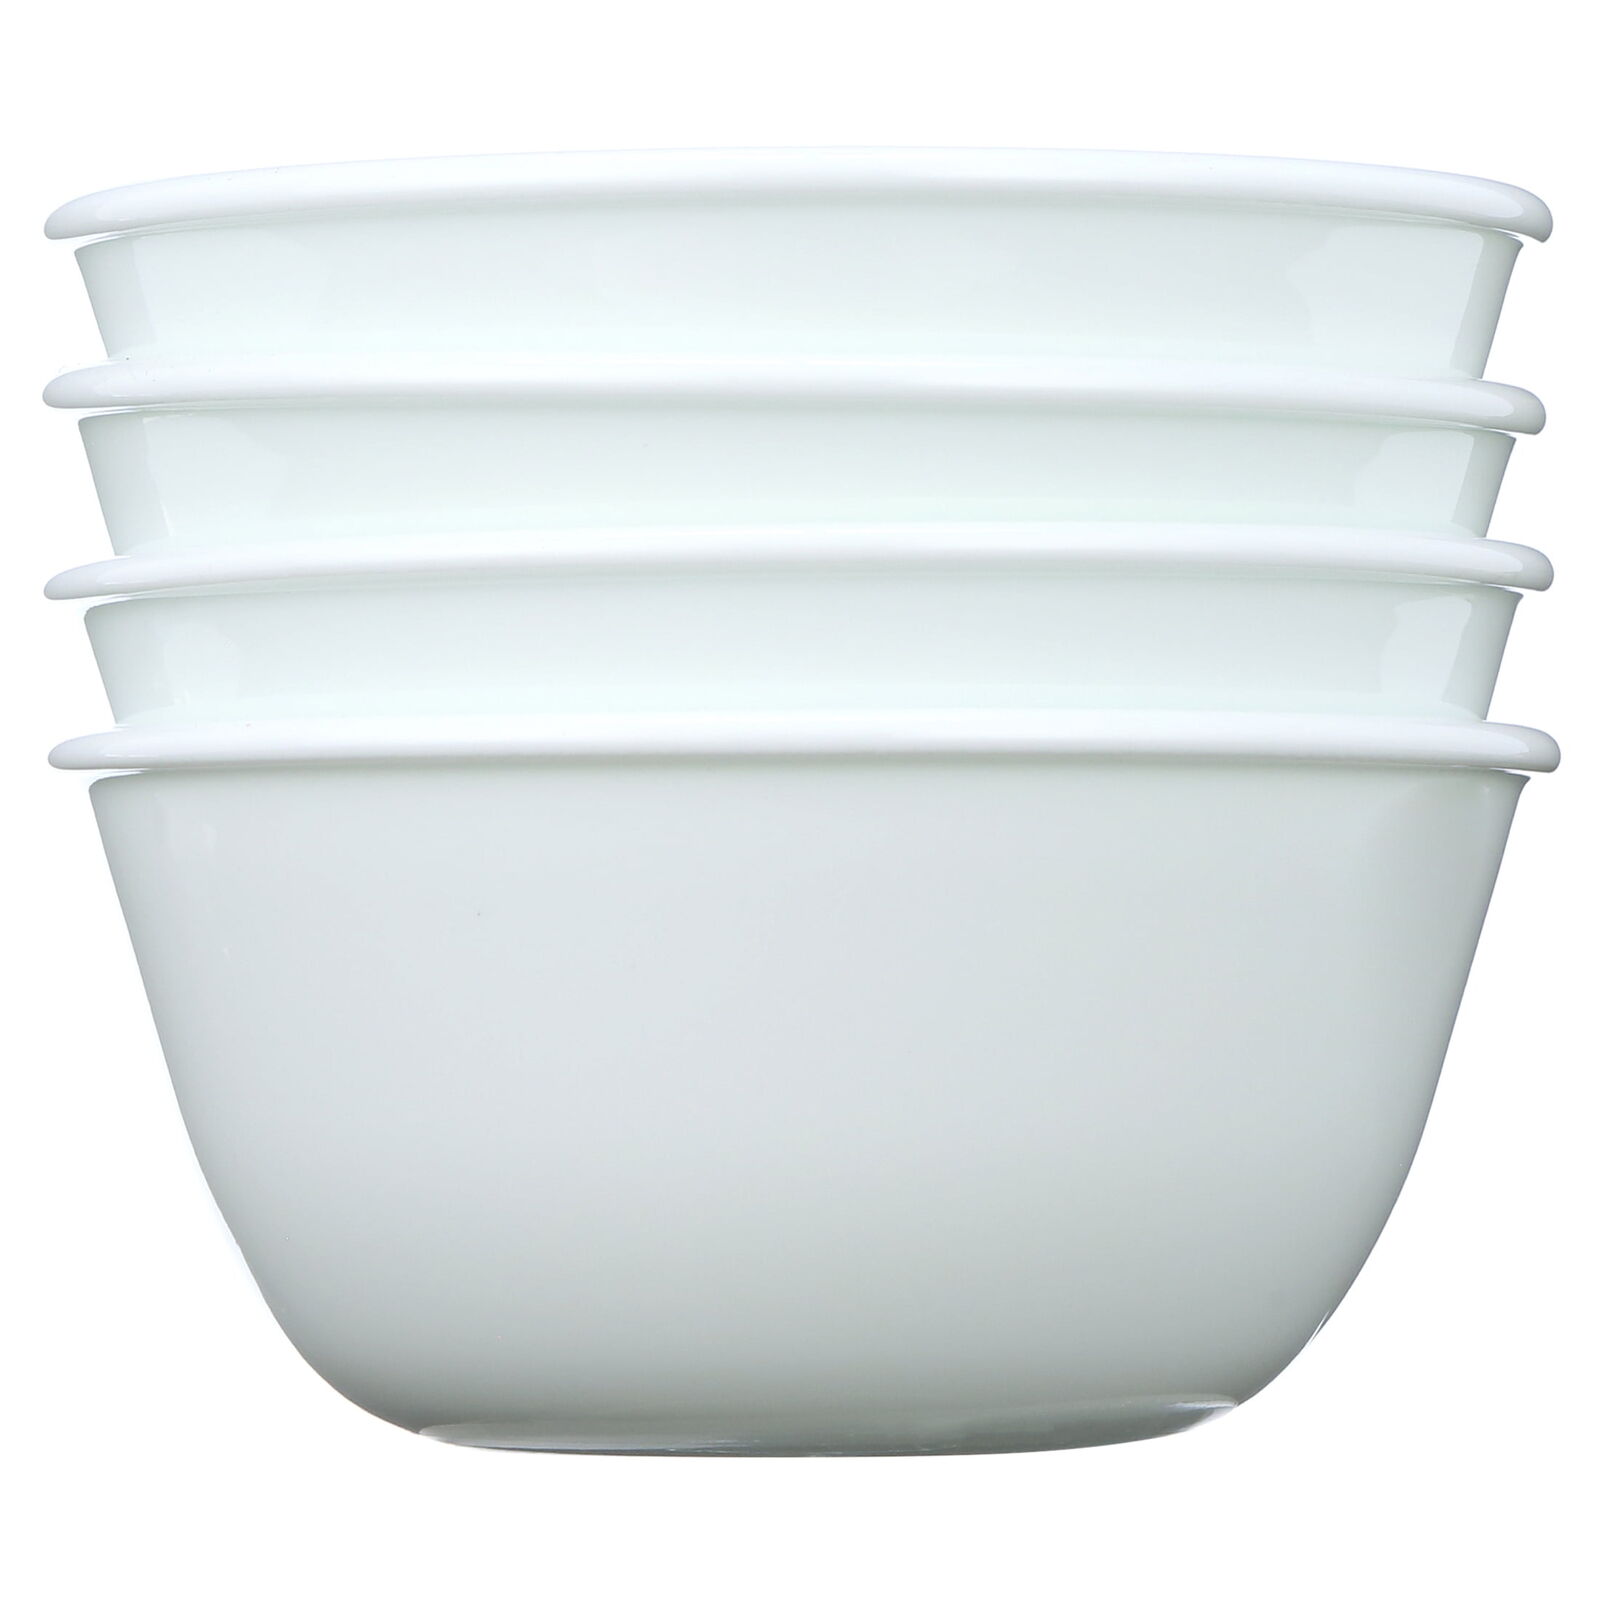 Corelle Classic Winter Frost White 12-oz Bowls Set of 4 Home Dinnerware Bowls